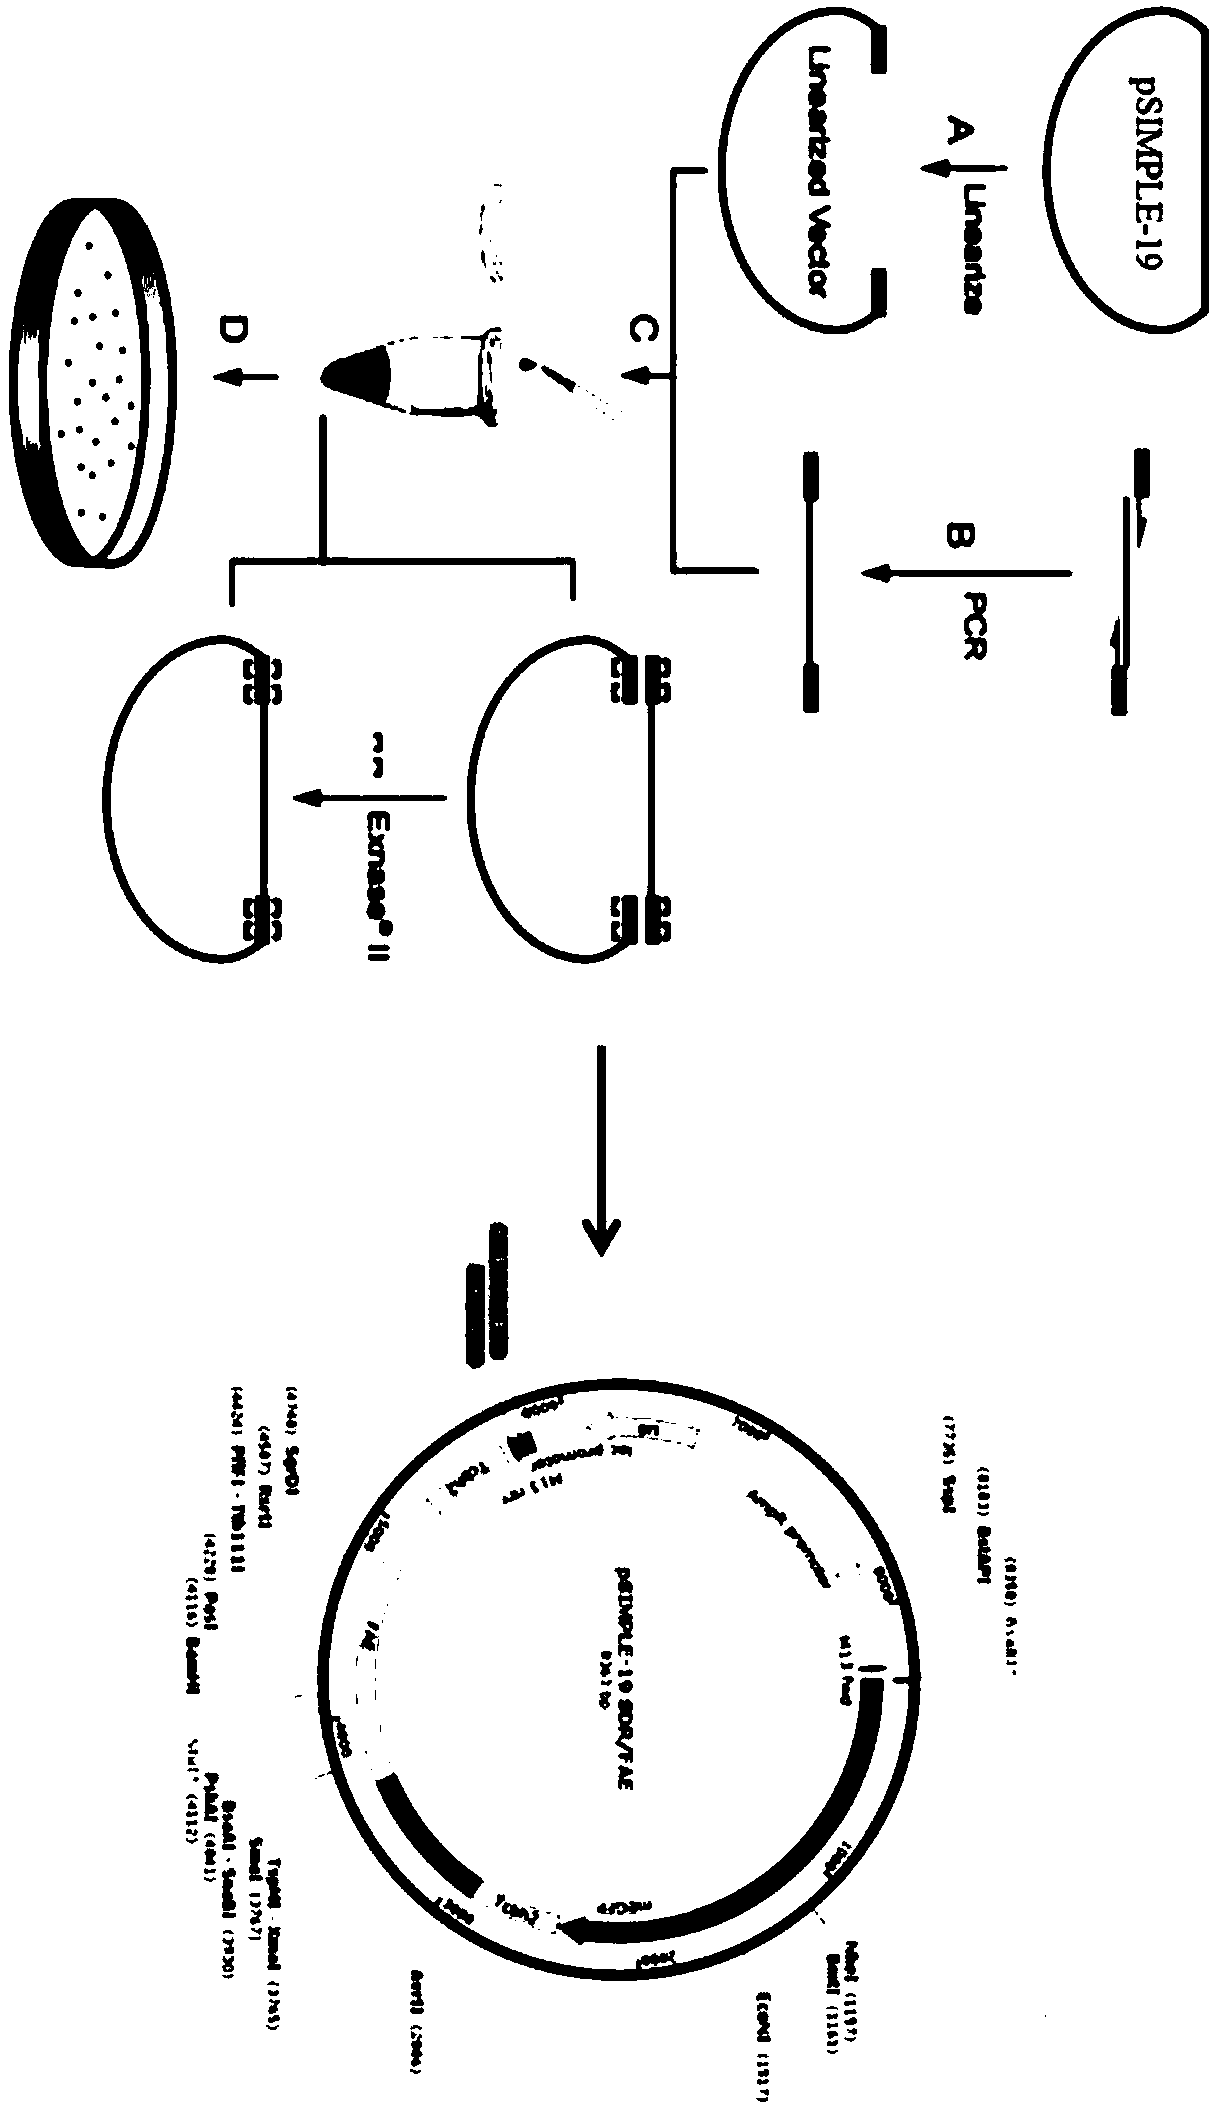 Composite cellulase system and application of composite cellulase system to producing starch fuel ethanol